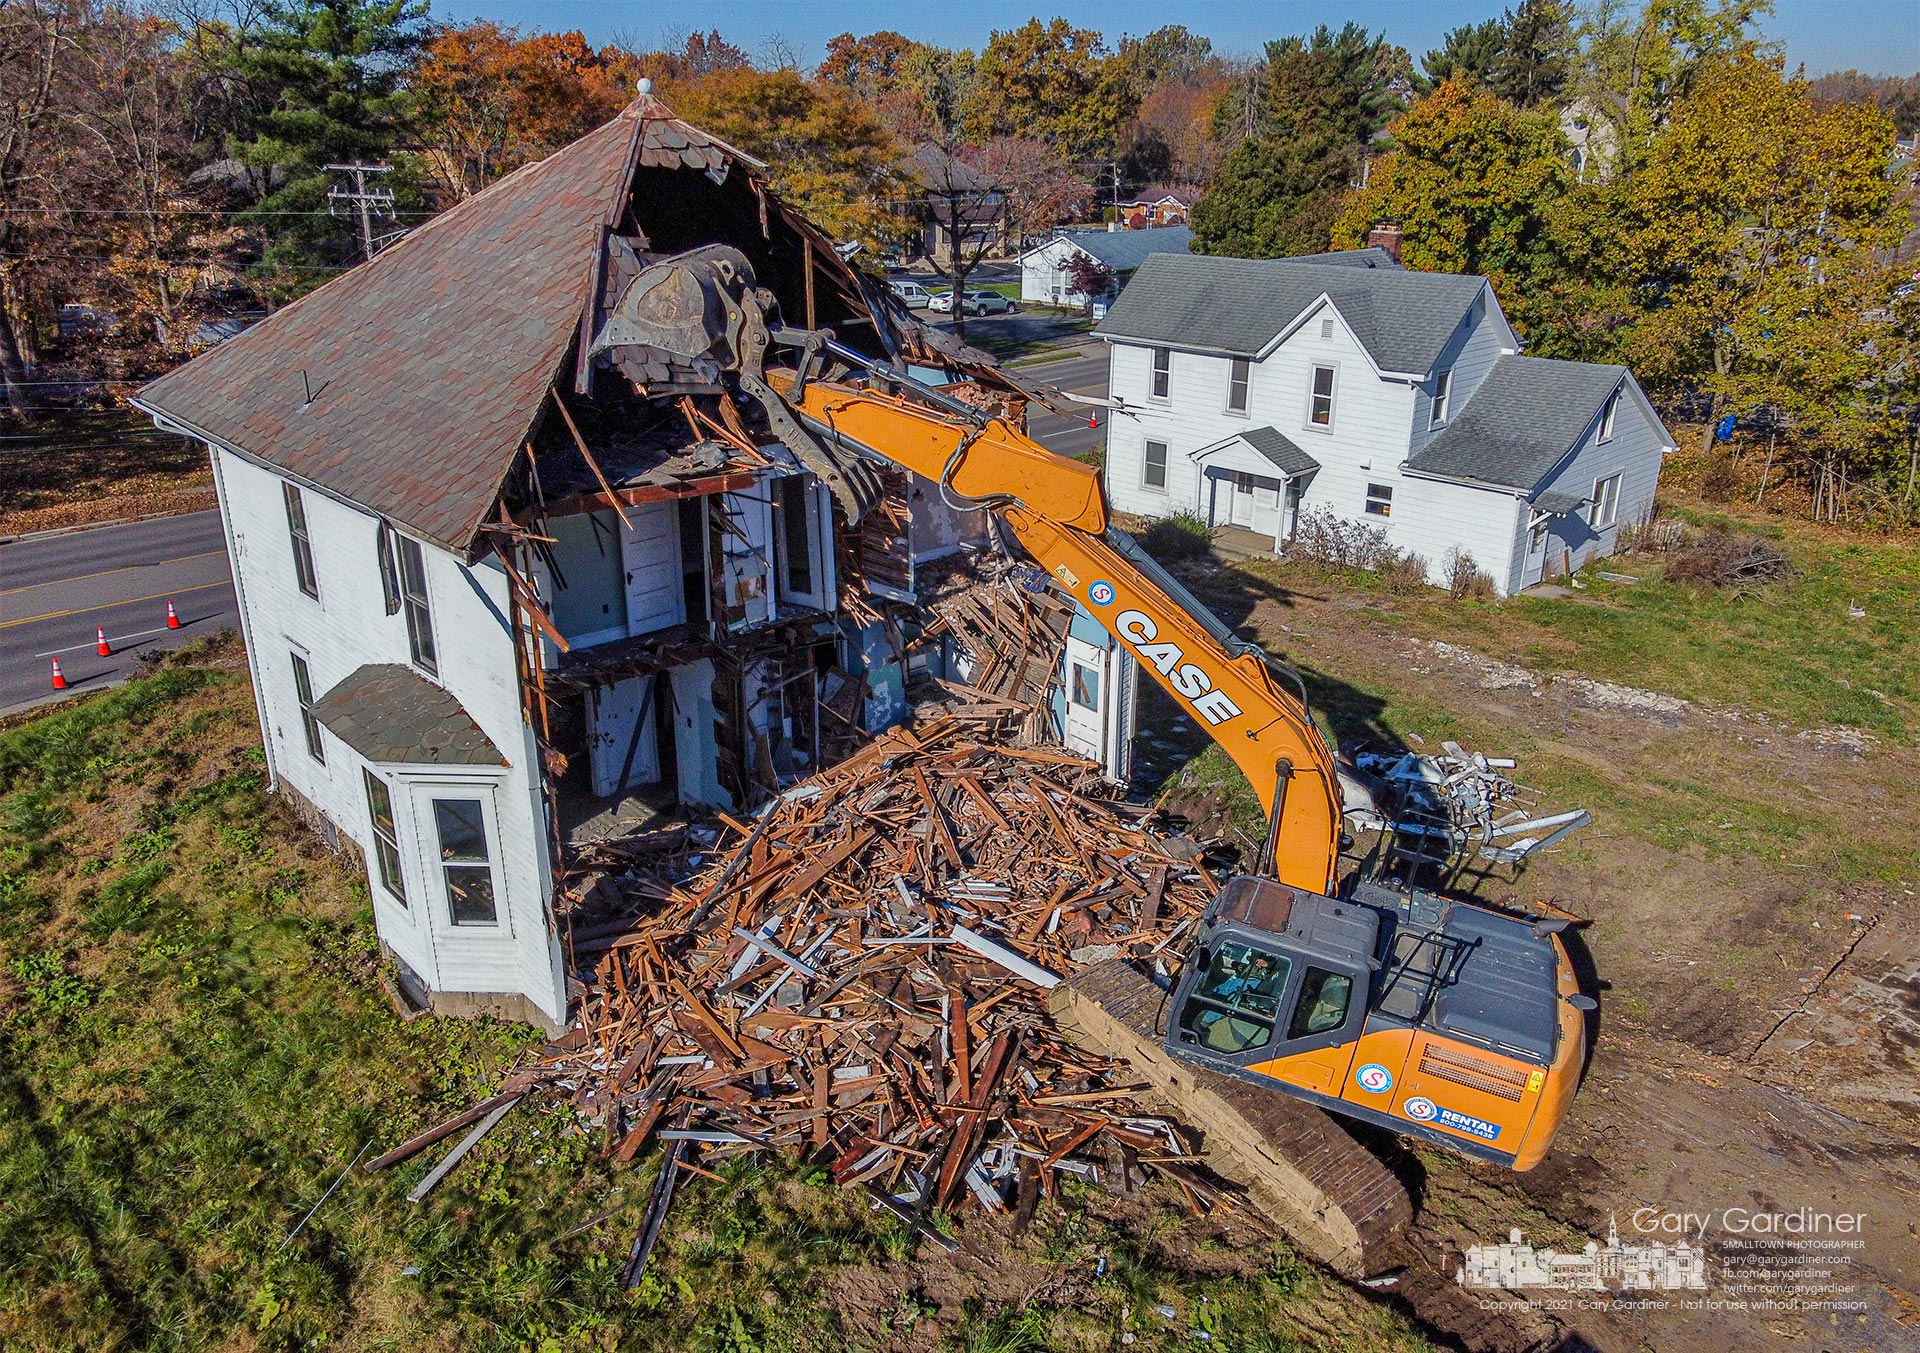 A work crew tears away the rear of the larger of two abandoned houses demolished Monday on South State Street to make way for a new structure housing business and apartments. My Final Photo for Nov. 8, 2021.